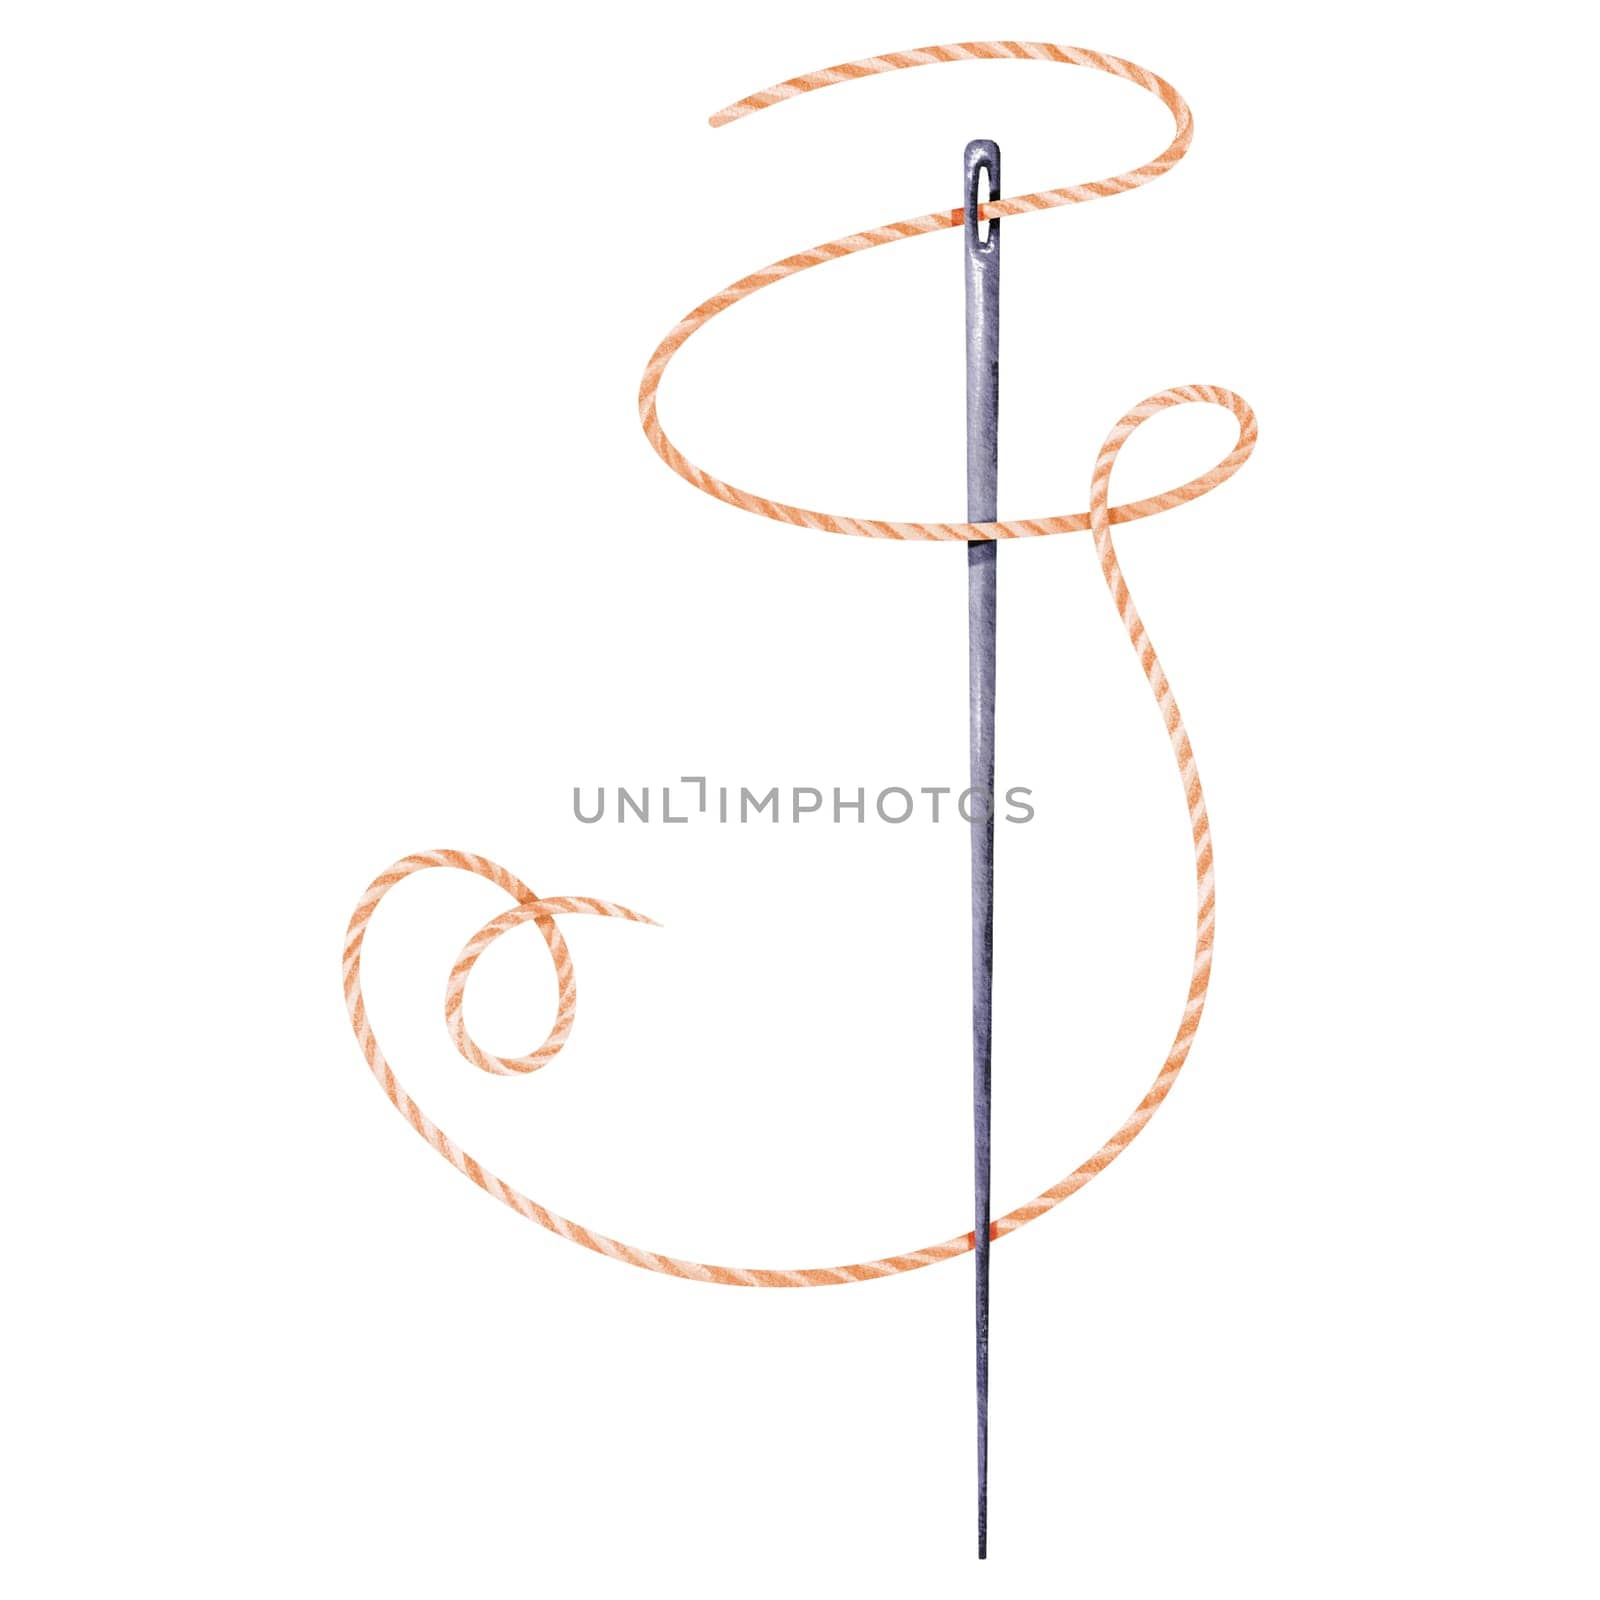 A steel needle with an orange thread. Graceful movement. Isolated object. Watercolor illustration. Ideal for sewing-related logos, crafting enthusiasts, needlework businesses, and DIY-themed designs by Art_Mari_Ka